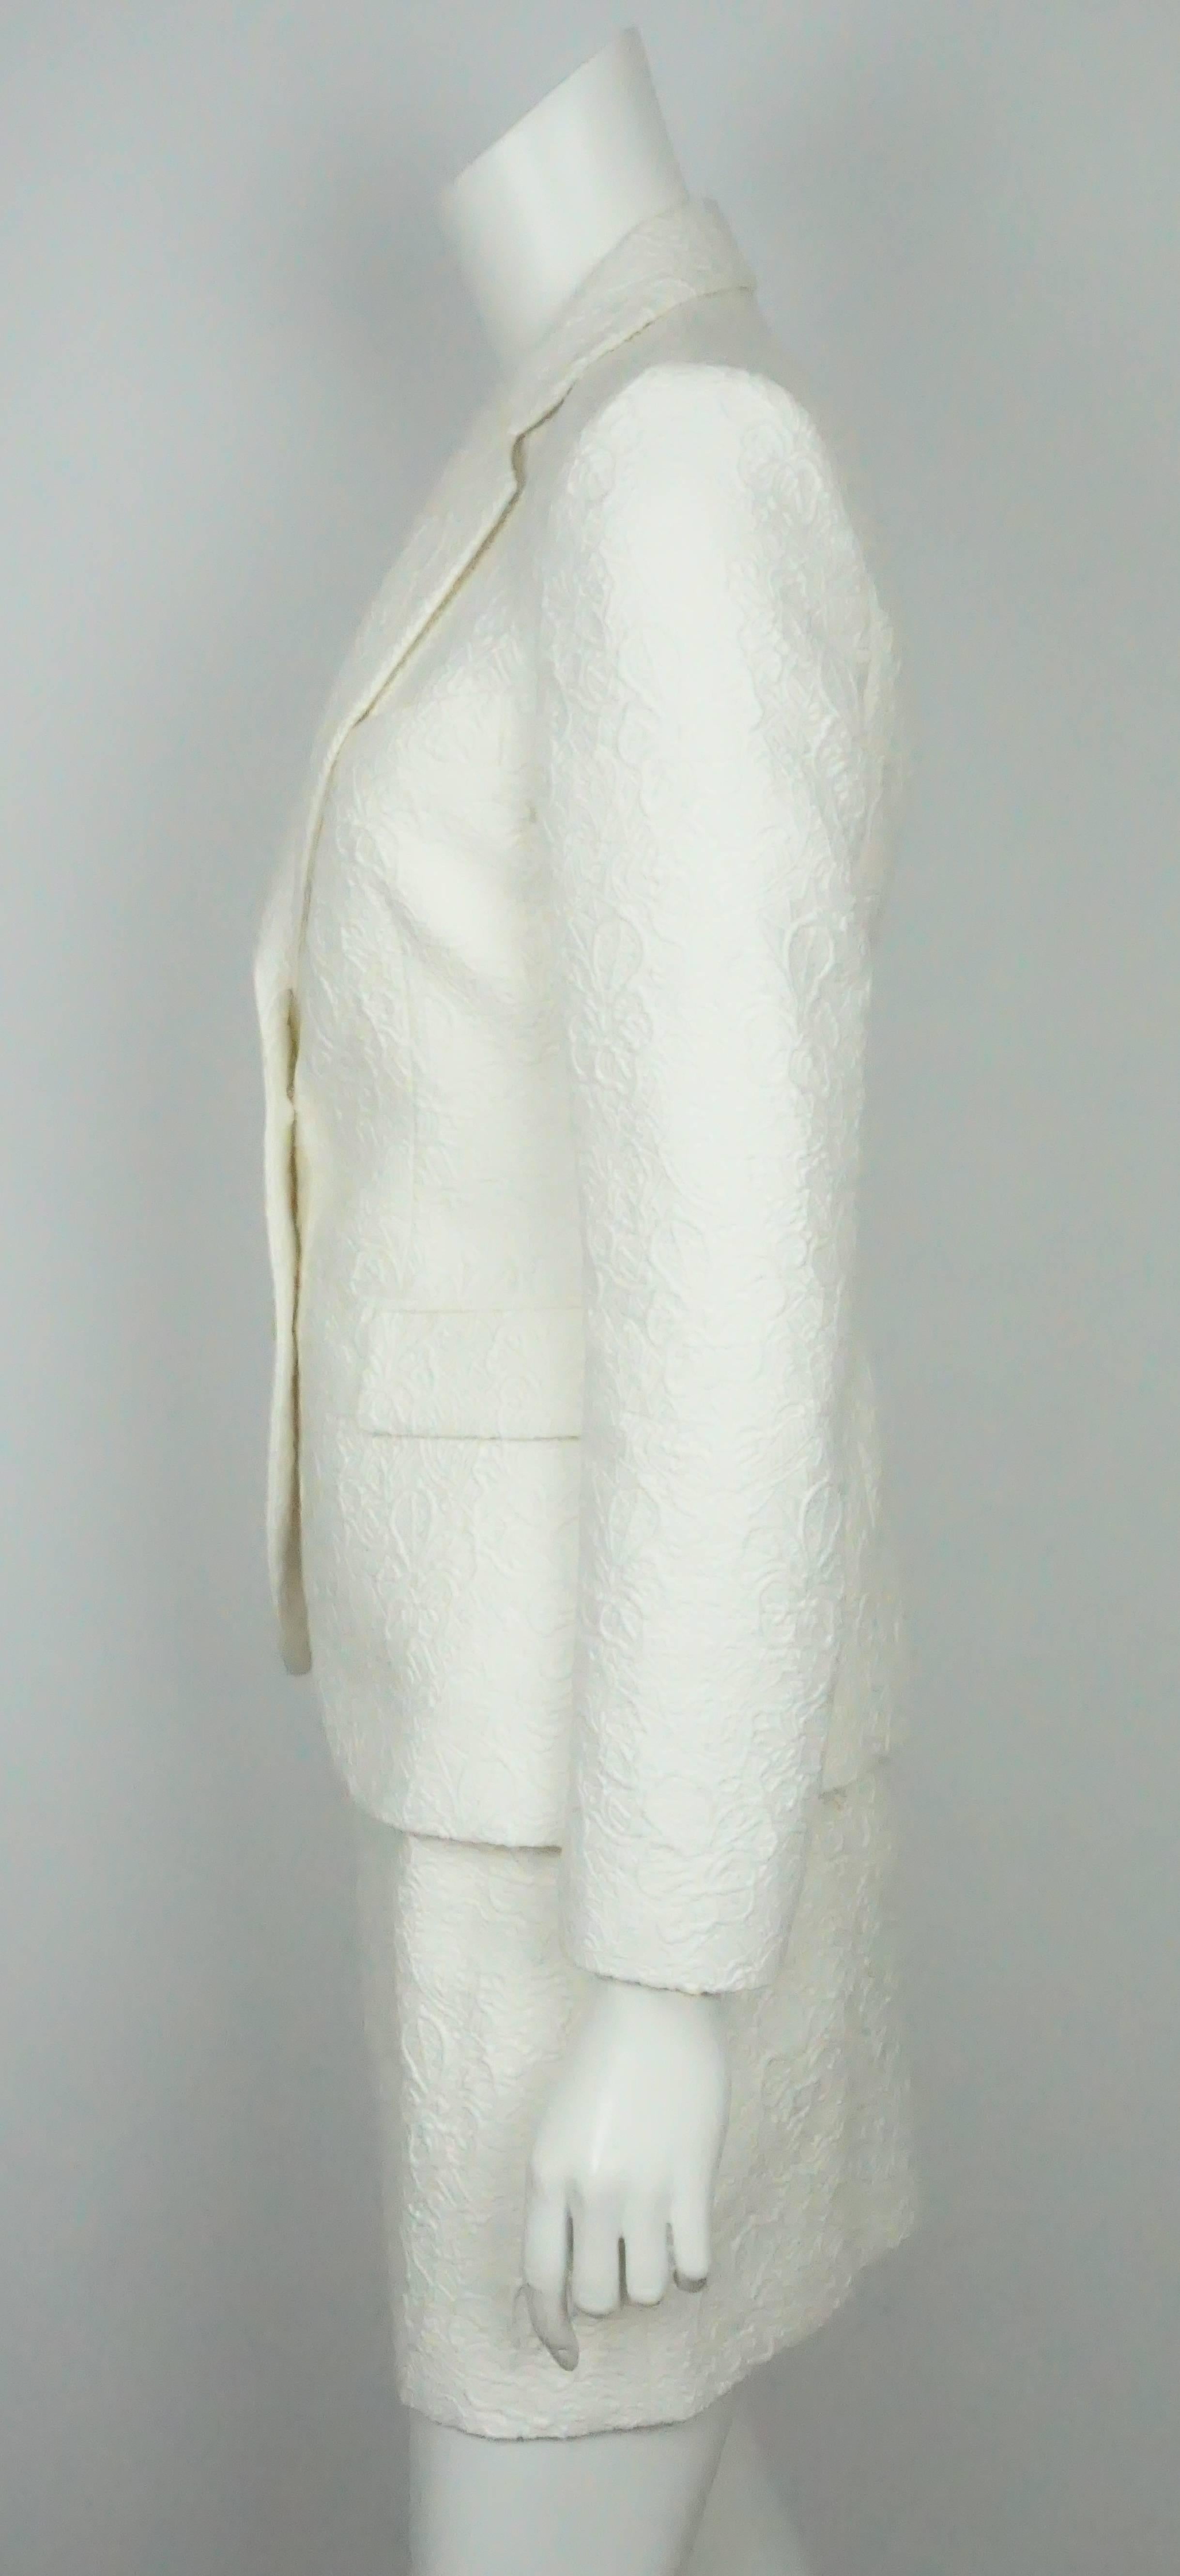 Emilio Pucci Ivory Textured Cotton/Silk Jacket and Skirt - 6-NWT  This elegant ivory cotton/silk skirt suit was never worn before. It has a quilted texture that shapes into a floral design. On the jacket there are two functional  front pockets with